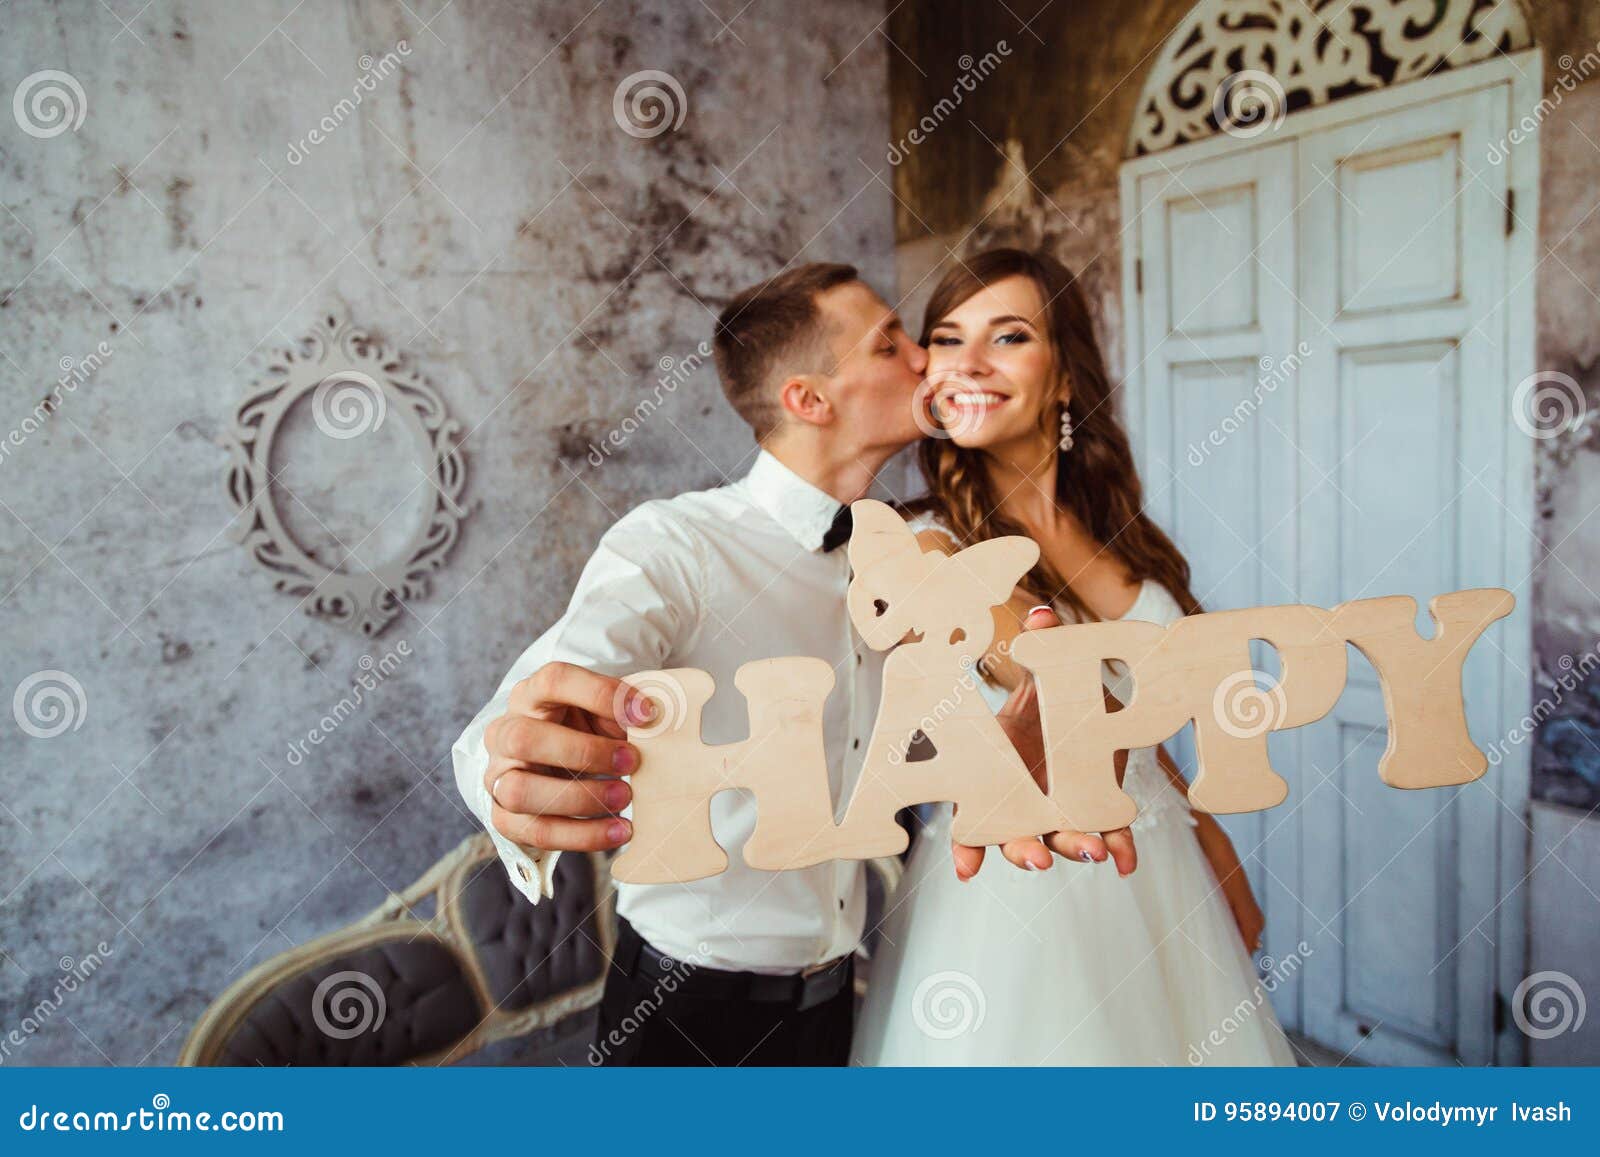 Closeup Of Wooden Lettering Happy Held By Wedding Couple ...